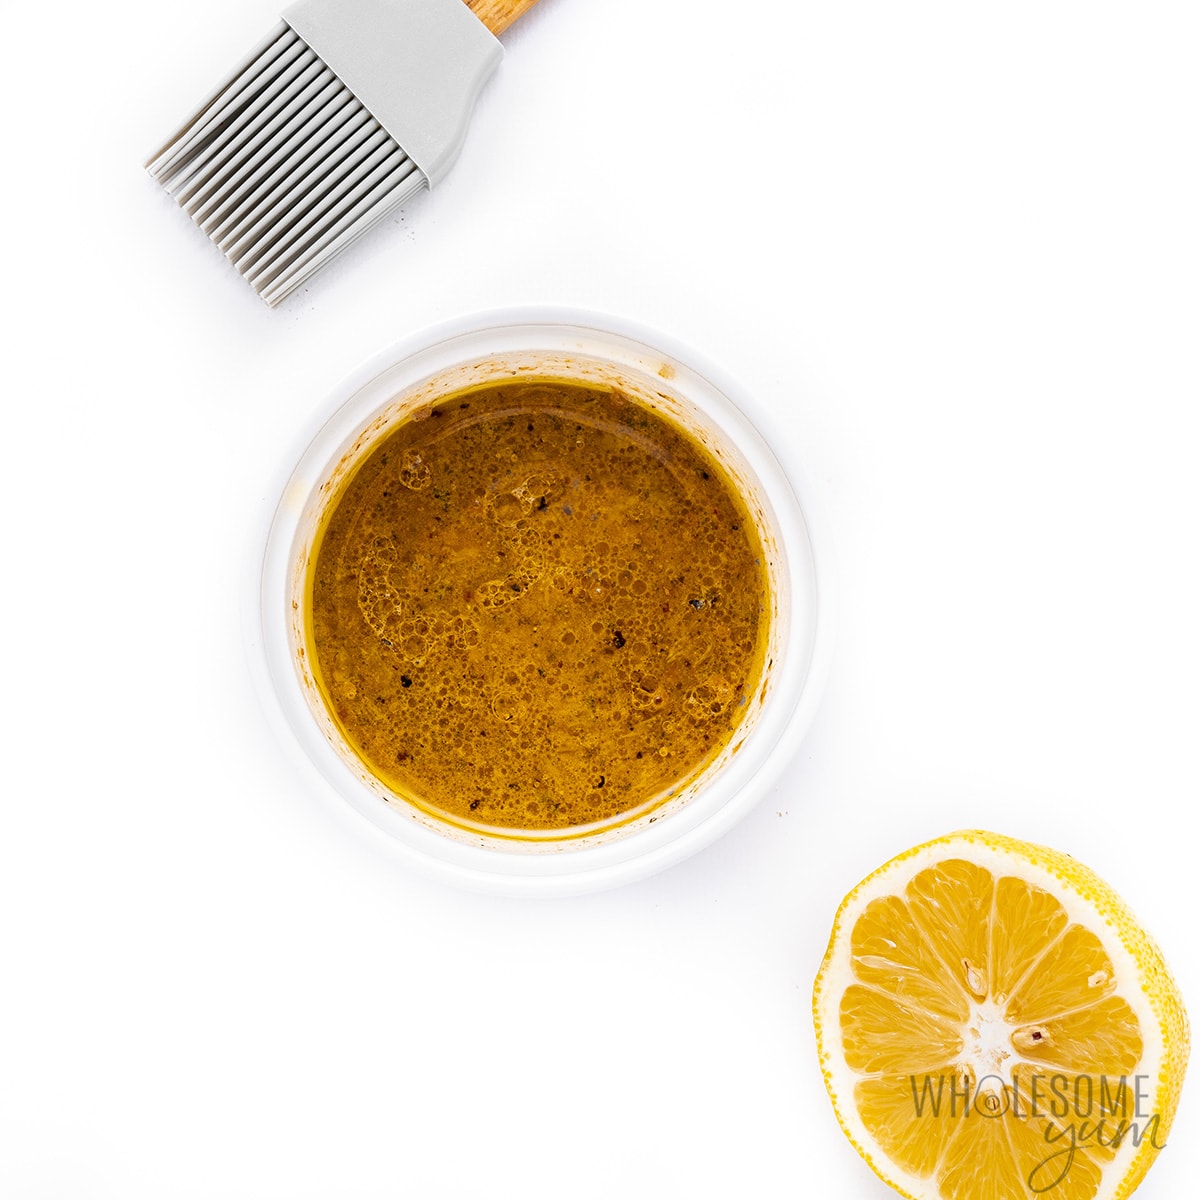 Oil, lemon juice, and seasonings whisked together in a small bowl.